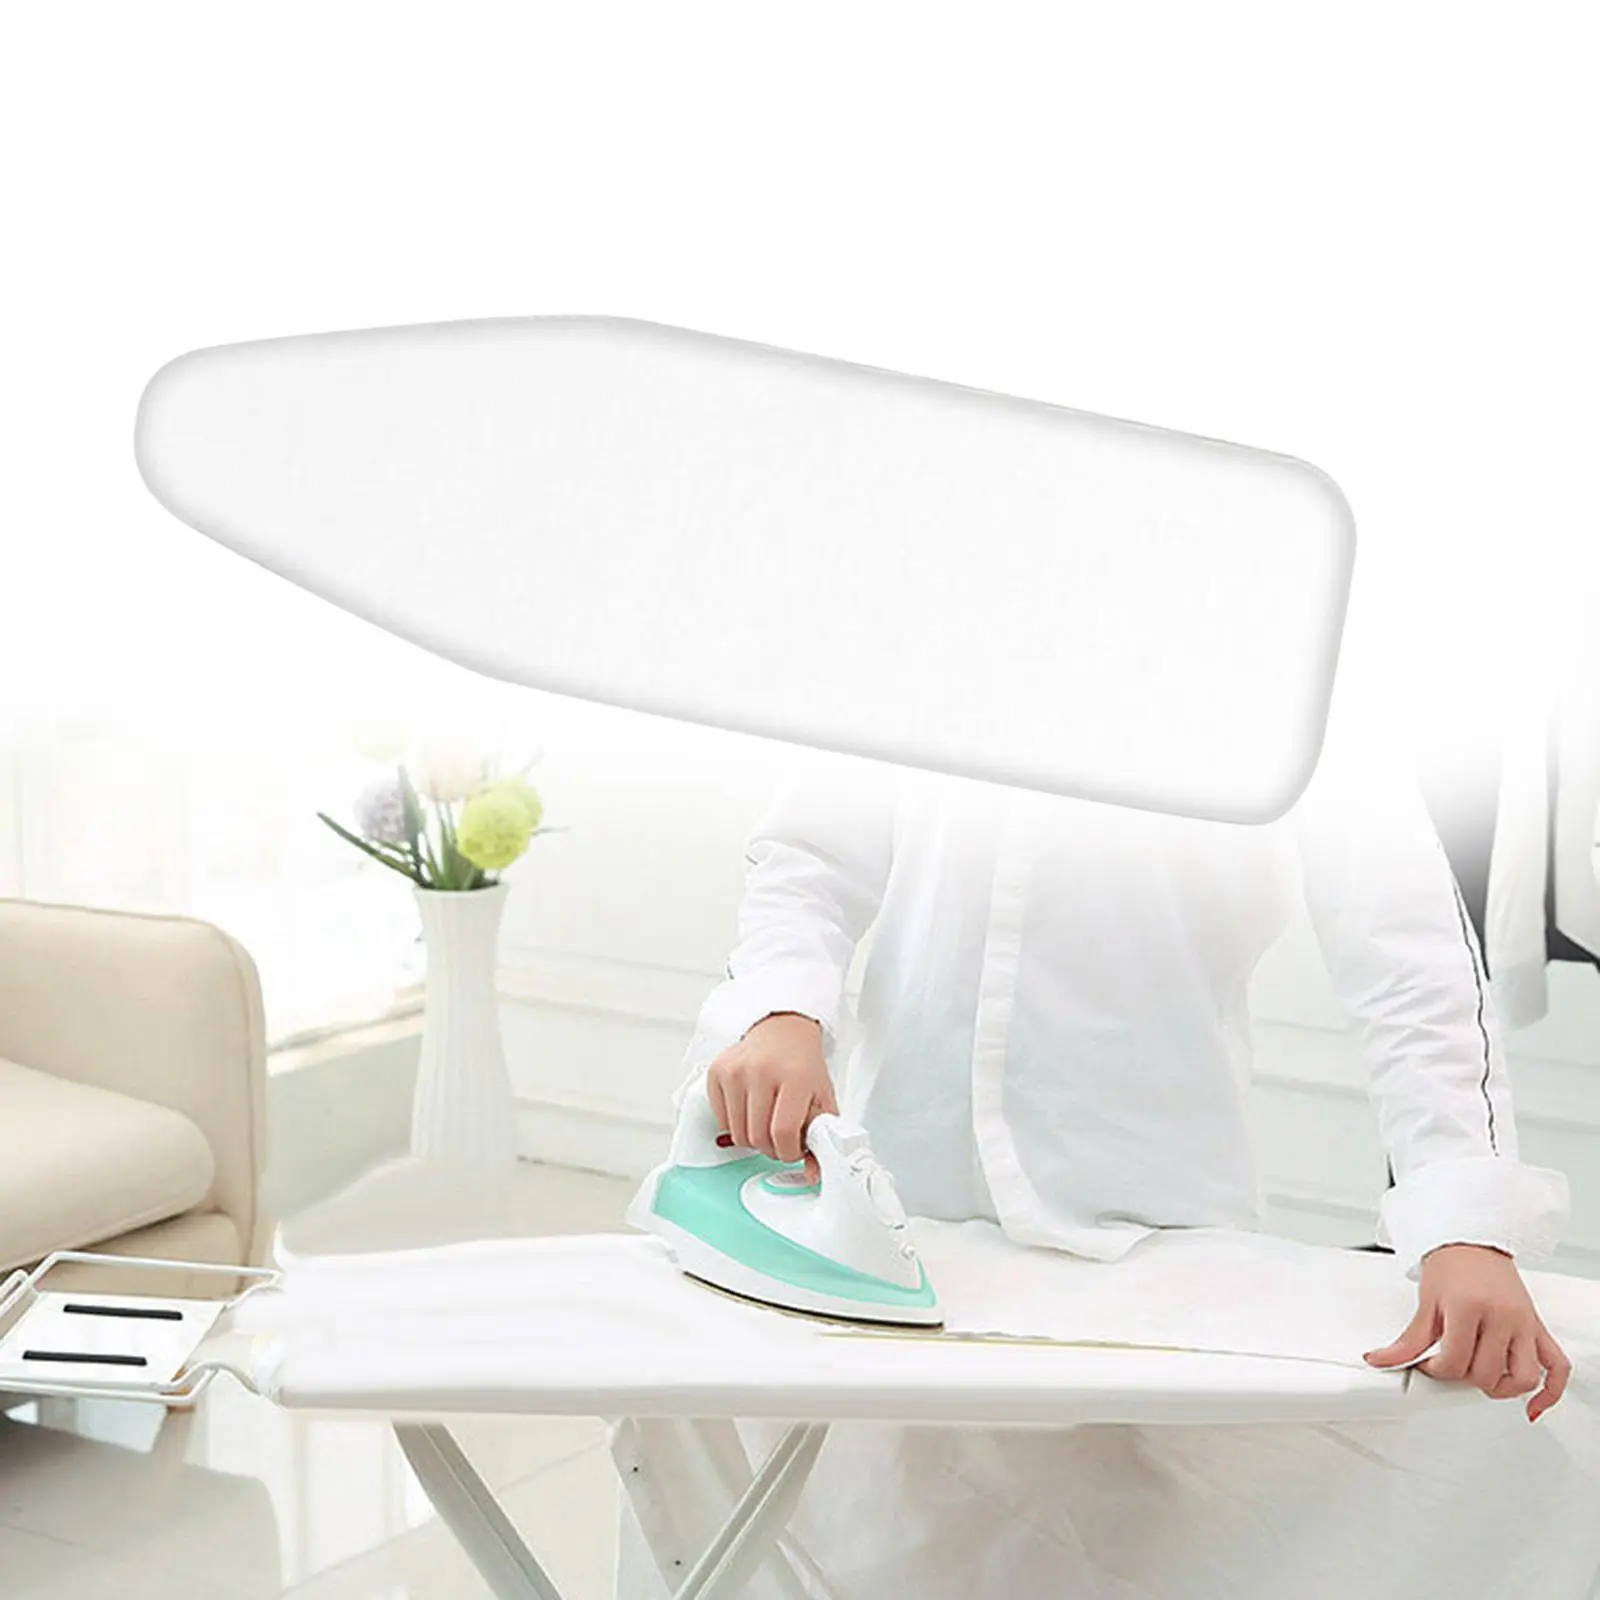 Ironing Board Padding Repairing Craft Room Ironing Table Cotton Pad for Ironing Table Breathable Ironing Board Cotton Pad